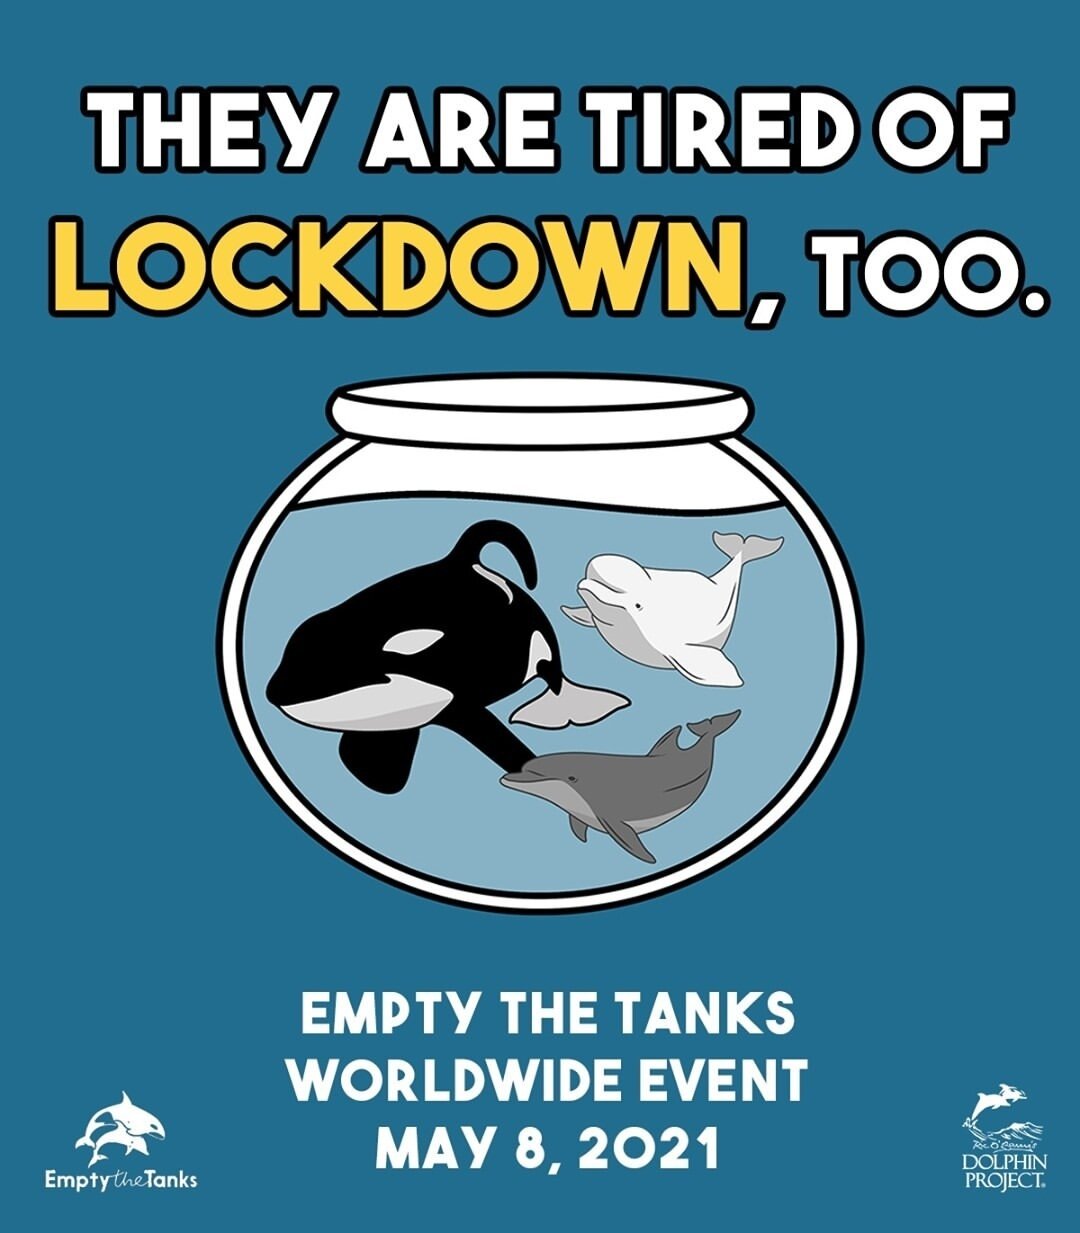 The 9th Annual #EmptytheTanks is this weekend! On May 8th, the global event will once again be held virtually.⁠
@EmptyTheTanksWorldwide is encouraging everyone to advocate from home. Get creative and make yard signs, create sidewalk murals, and more 